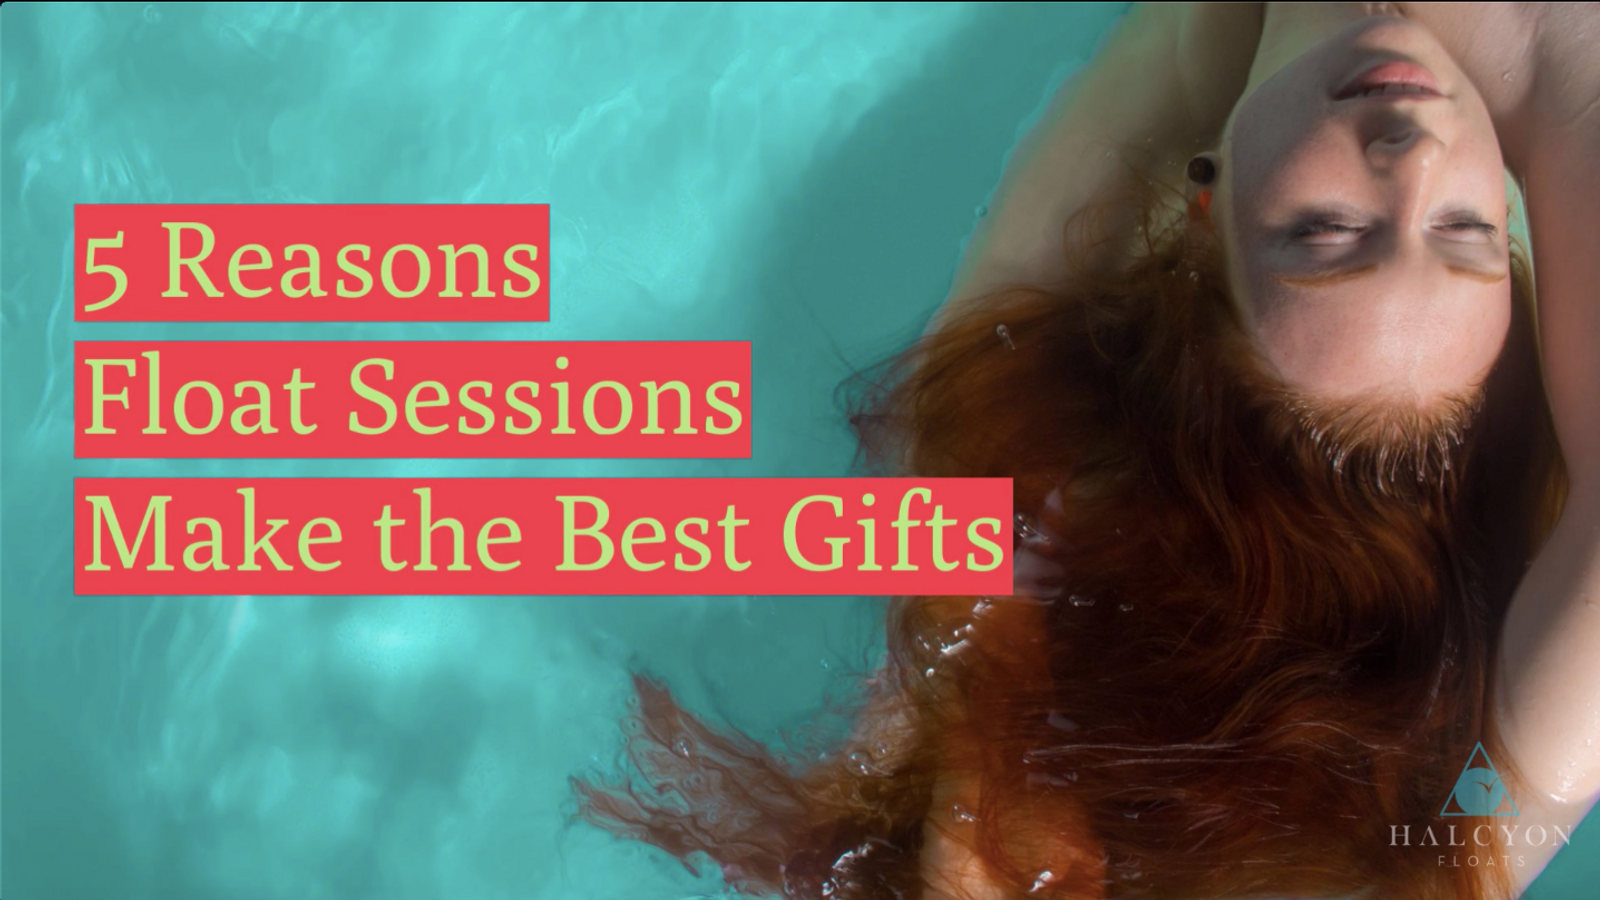 5 Reasons Float Sessions Make the Best Gifts